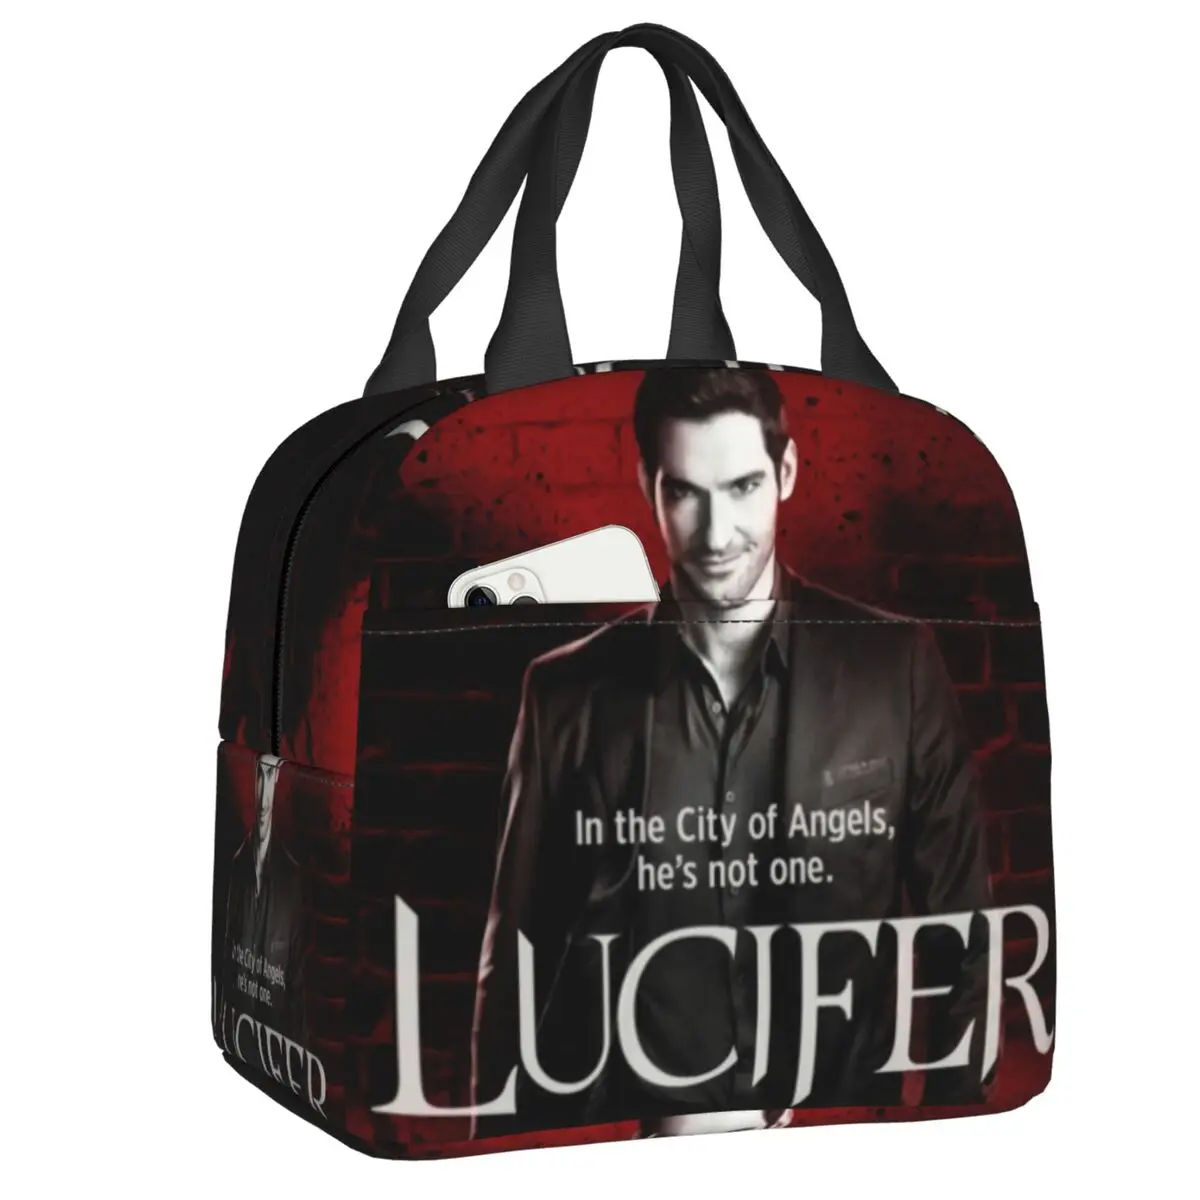 

Lucifer Insulated Lunch Bags for Women Satan Morningstar Devil Portable Cooler Thermal Bento Box Work School Travel